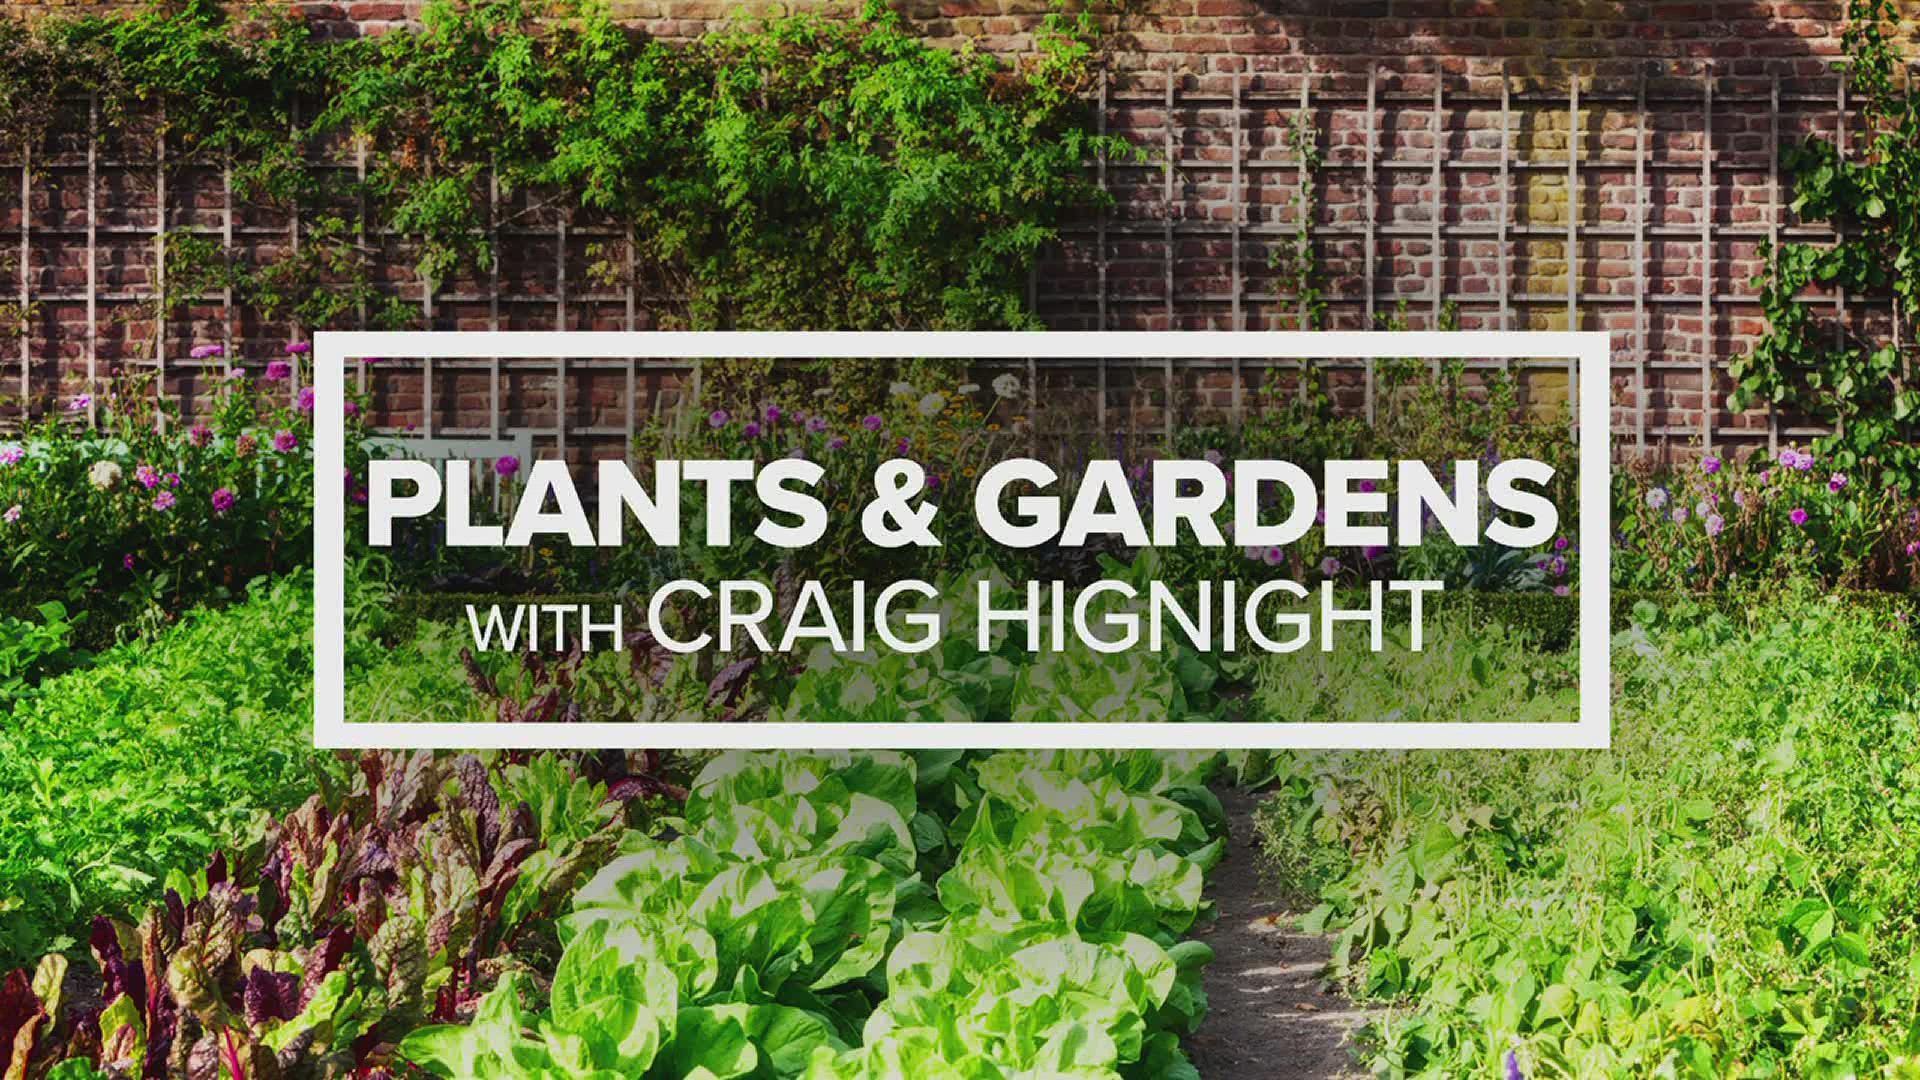 Craig Hignight answers your Plants & Gardens questions every Wednesday during Good Morning Quad Cities at 11 a.m.